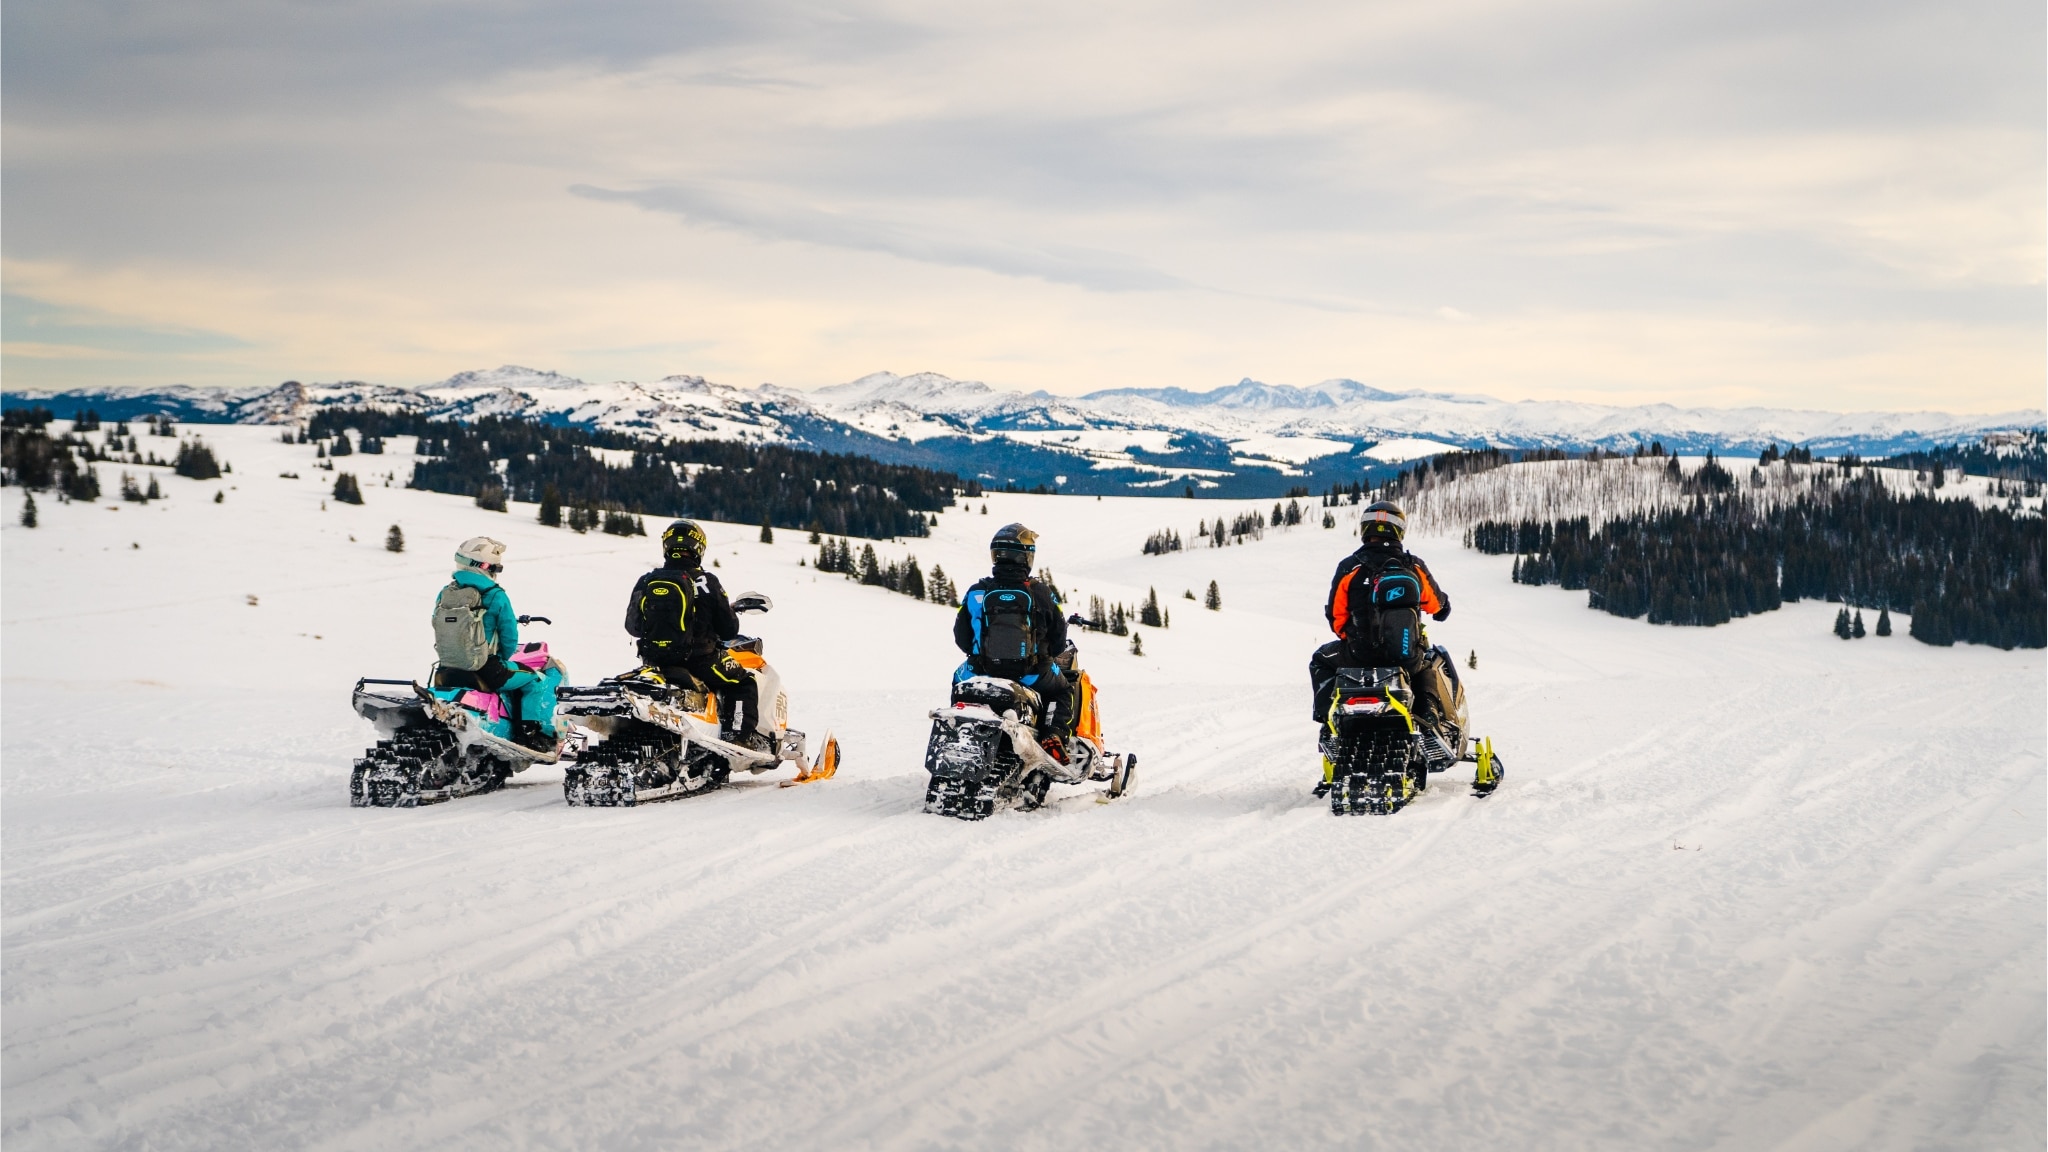 Four Ski-Doo snowmobile riders overlooking the Wyoming landscape